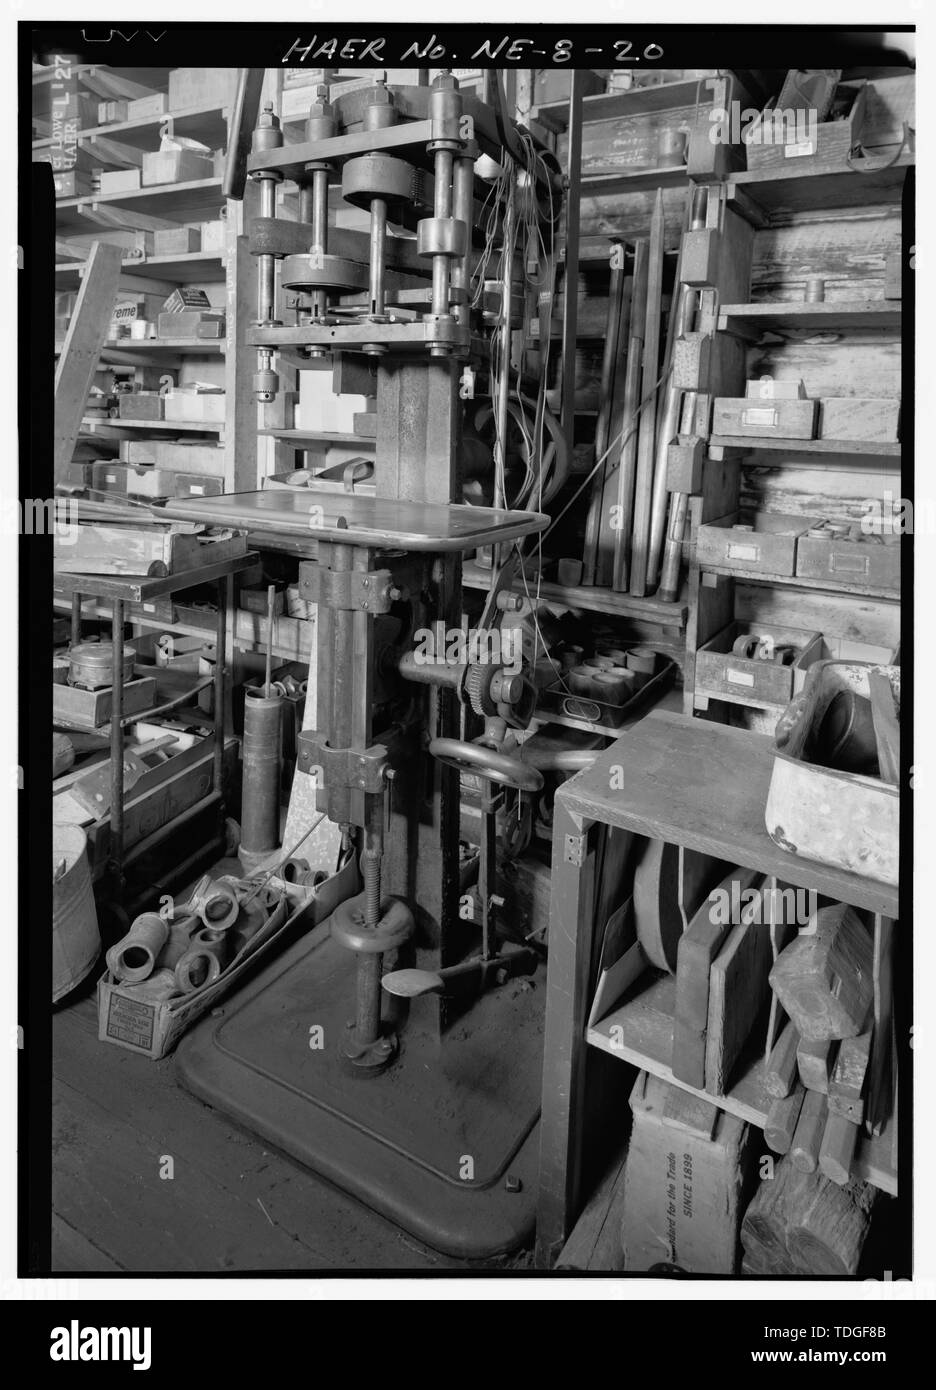 NORTHEAST TO CIRCA 1900 FOUR-SPINDLE PRODUCTION DRILL PRESS ALONG EAST INTERIOR WALL OF FACTORY, SHOWING SHELVES AND BINS WITH TOOLS AND PARTS FOR PUMP AND WATER SYSTEM REPAIR. - Kregel Windmill Company Factory, 1416 Central Avenue, Nebraska City, Otoe County, NE Stock Photo